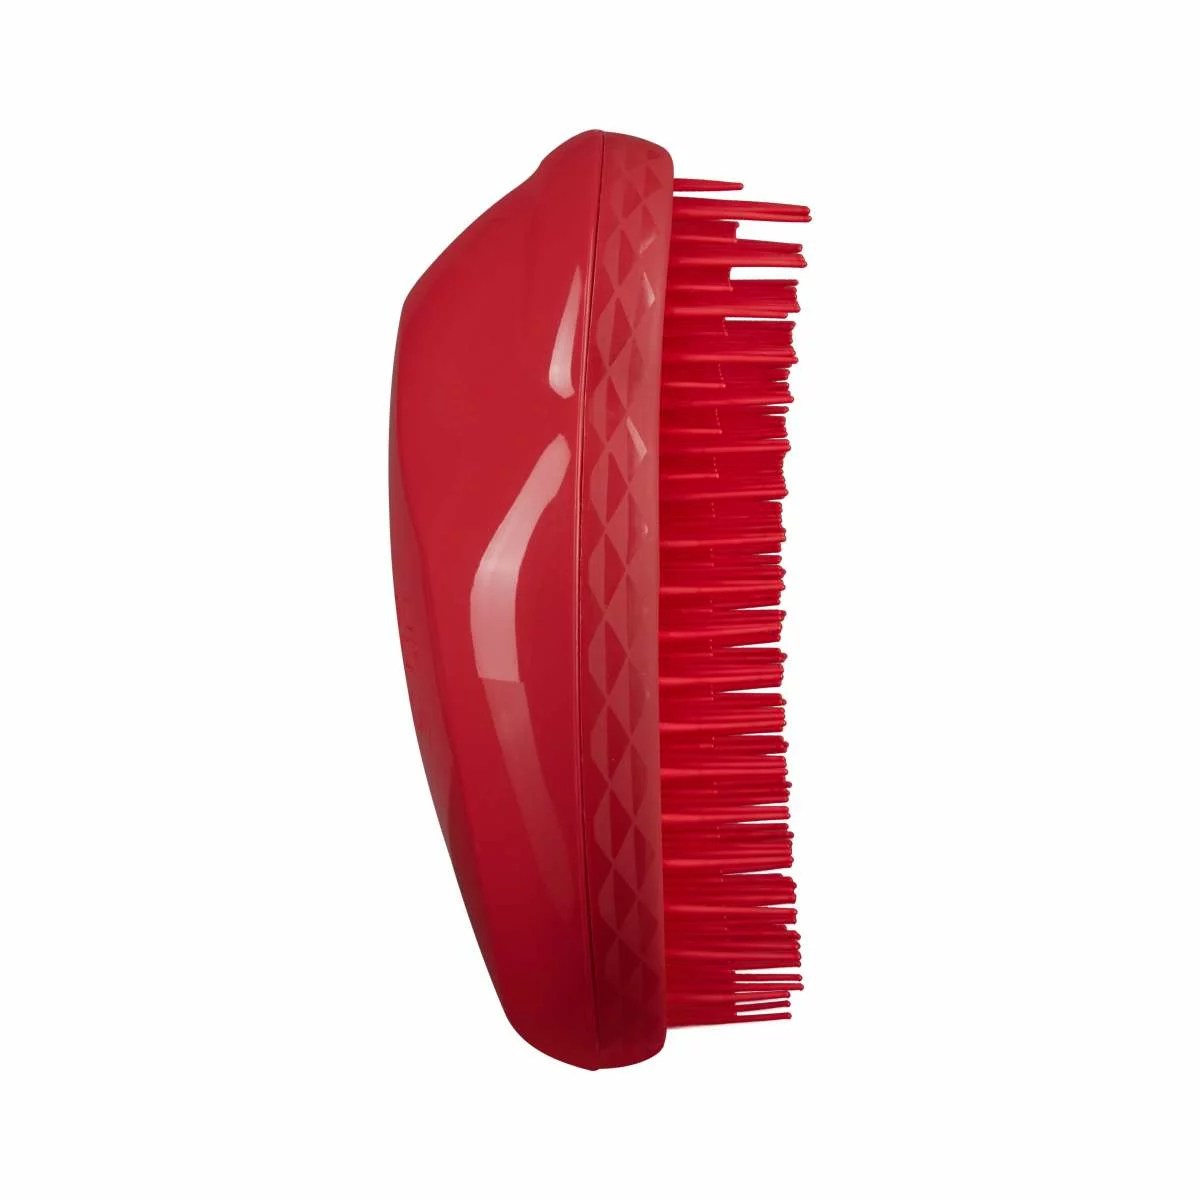 Tangle Teezer Thick & Curly, best detangling brushes